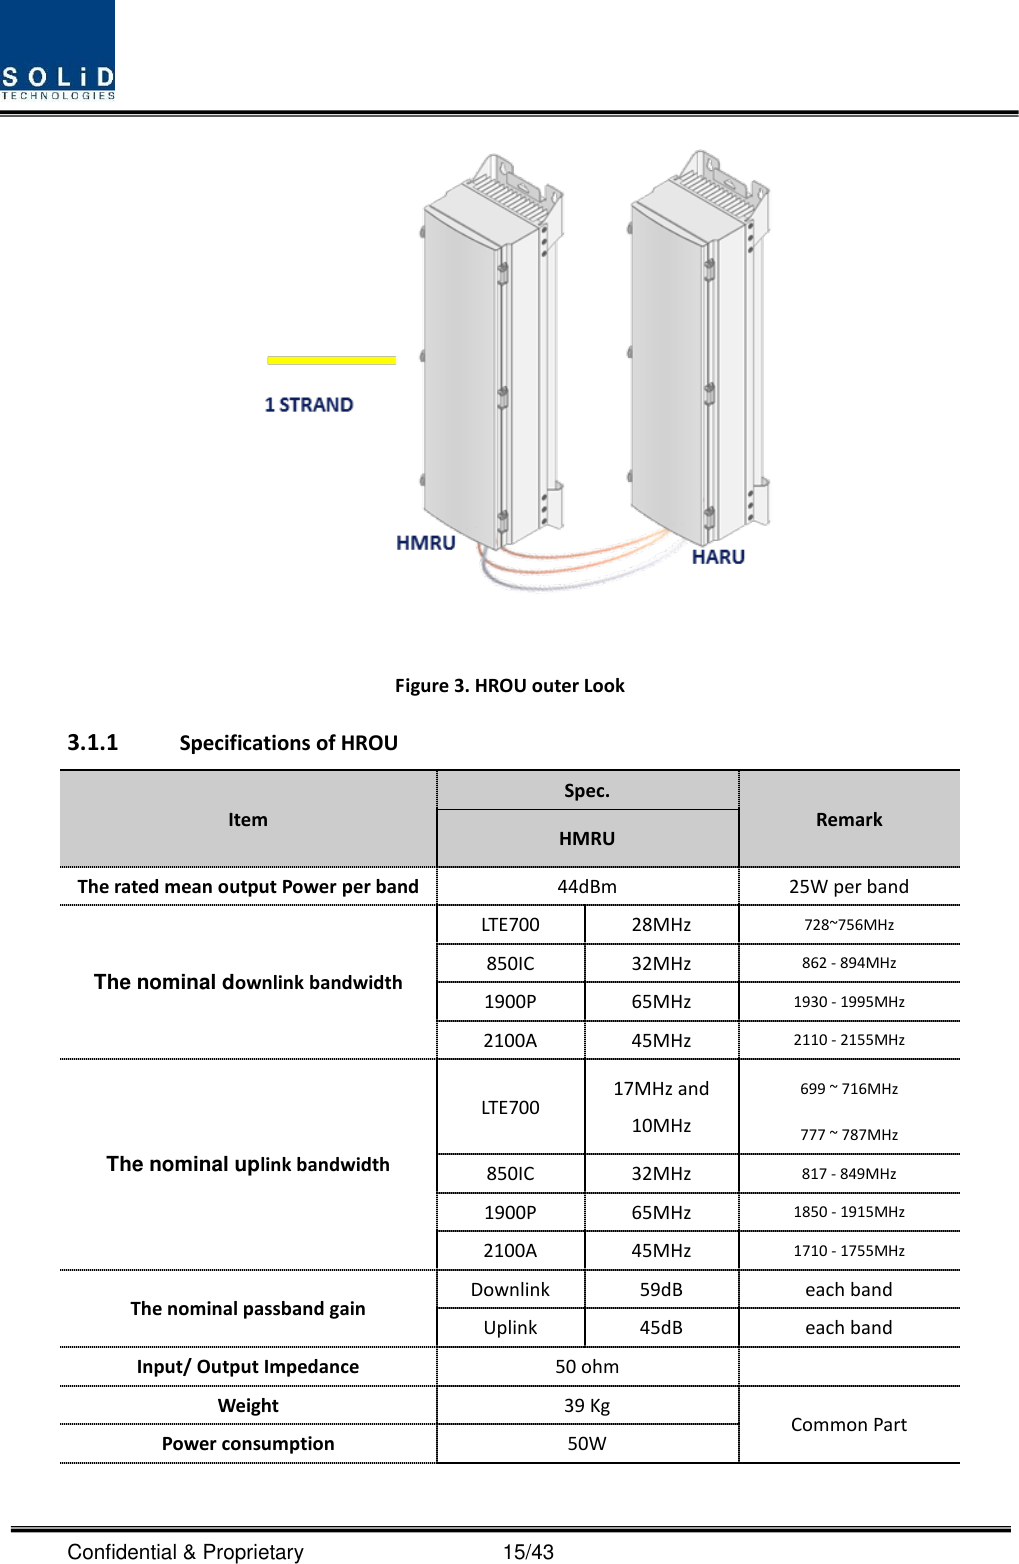  Confidential &amp; Proprietary                                      15/43  Figure 3. HROU outer Look 3.1.1 Specifications of HROU Item Spec. Remark HMRU The rated mean output Power per band 44dBm   25W per band The nominal downlink bandwidth LTE700 28MHz 728~756MHz 850IC 32MHz 862 - 894MHz 1900P 65MHz 1930 - 1995MHz 2100A 45MHz 2110 - 2155MHz   The nominal uplink bandwidth LTE700 17MHz and 10MHz 699 ~ 716MHz   777 ~ 787MHz 850IC 32MHz 817 - 849MHz   1900P 65MHz 1850 - 1915MHz   2100A 45MHz 1710 - 1755MHz The nominal passband gain Downlink 59dB each band Uplink 45dB each band Input/ Output Impedance   50 ohm    Weight 39 Kg Common Part Power consumption 50W 